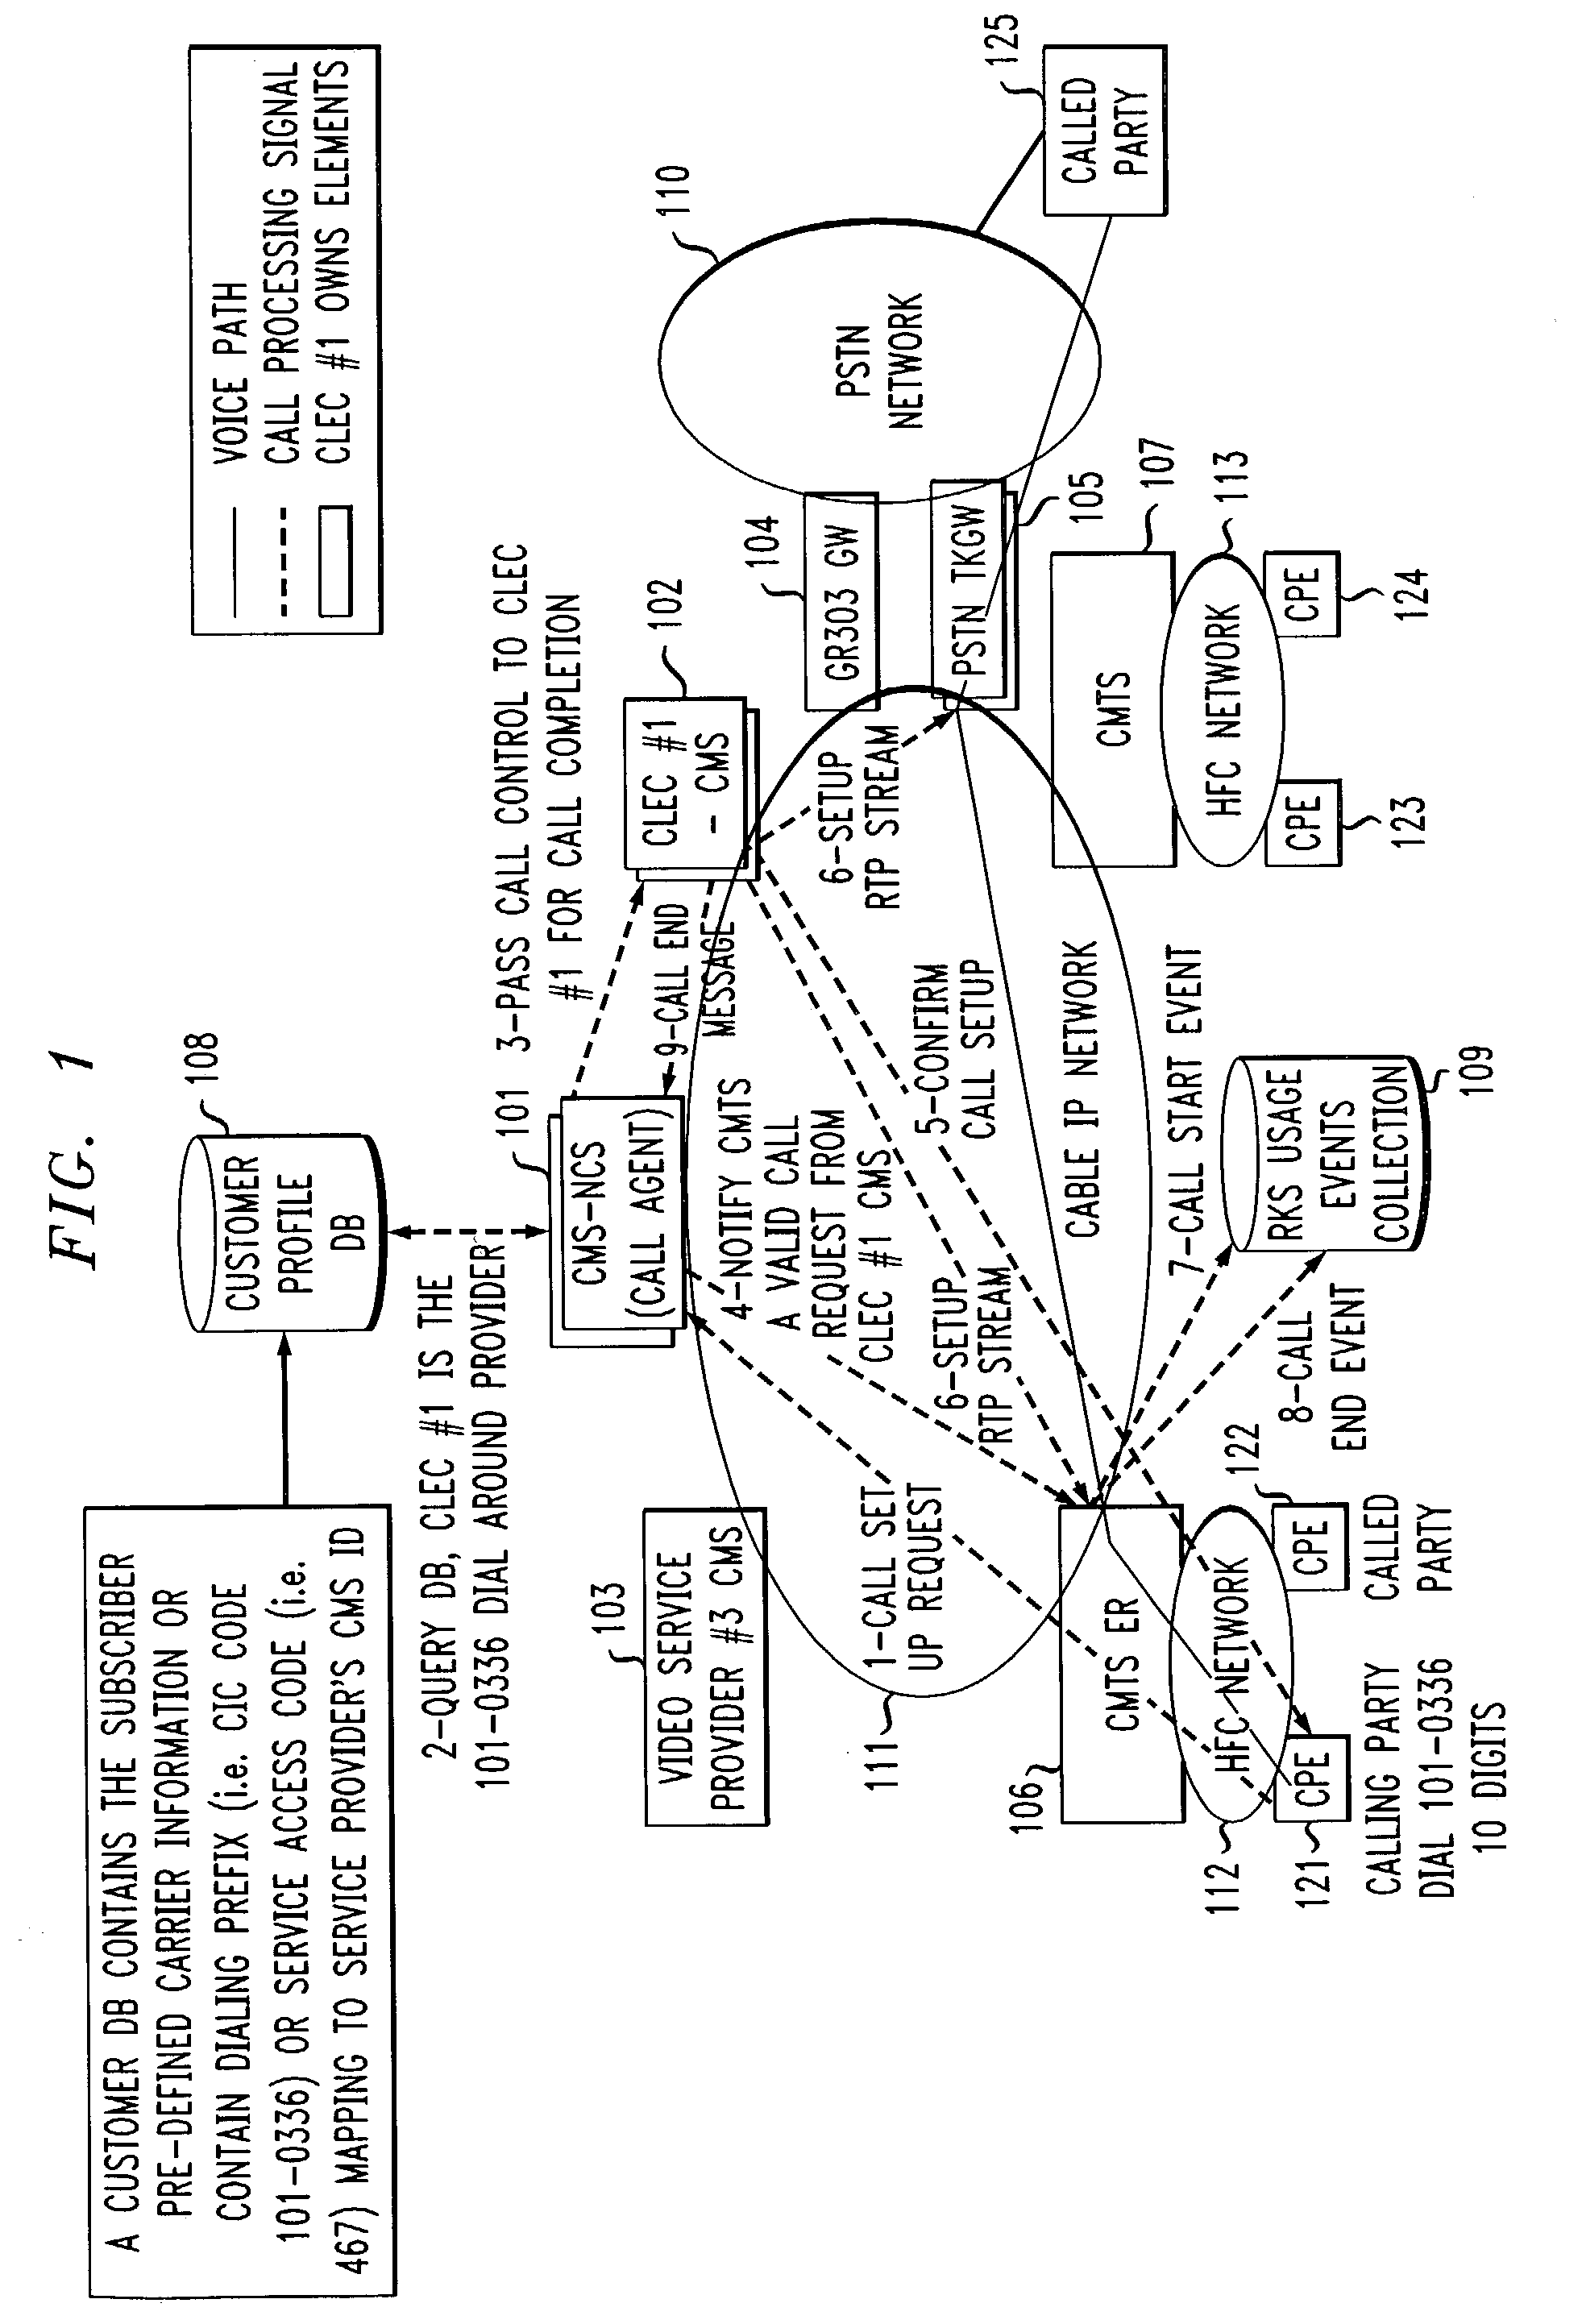 Method and apparatus for handing off control of service access over a cable IP network